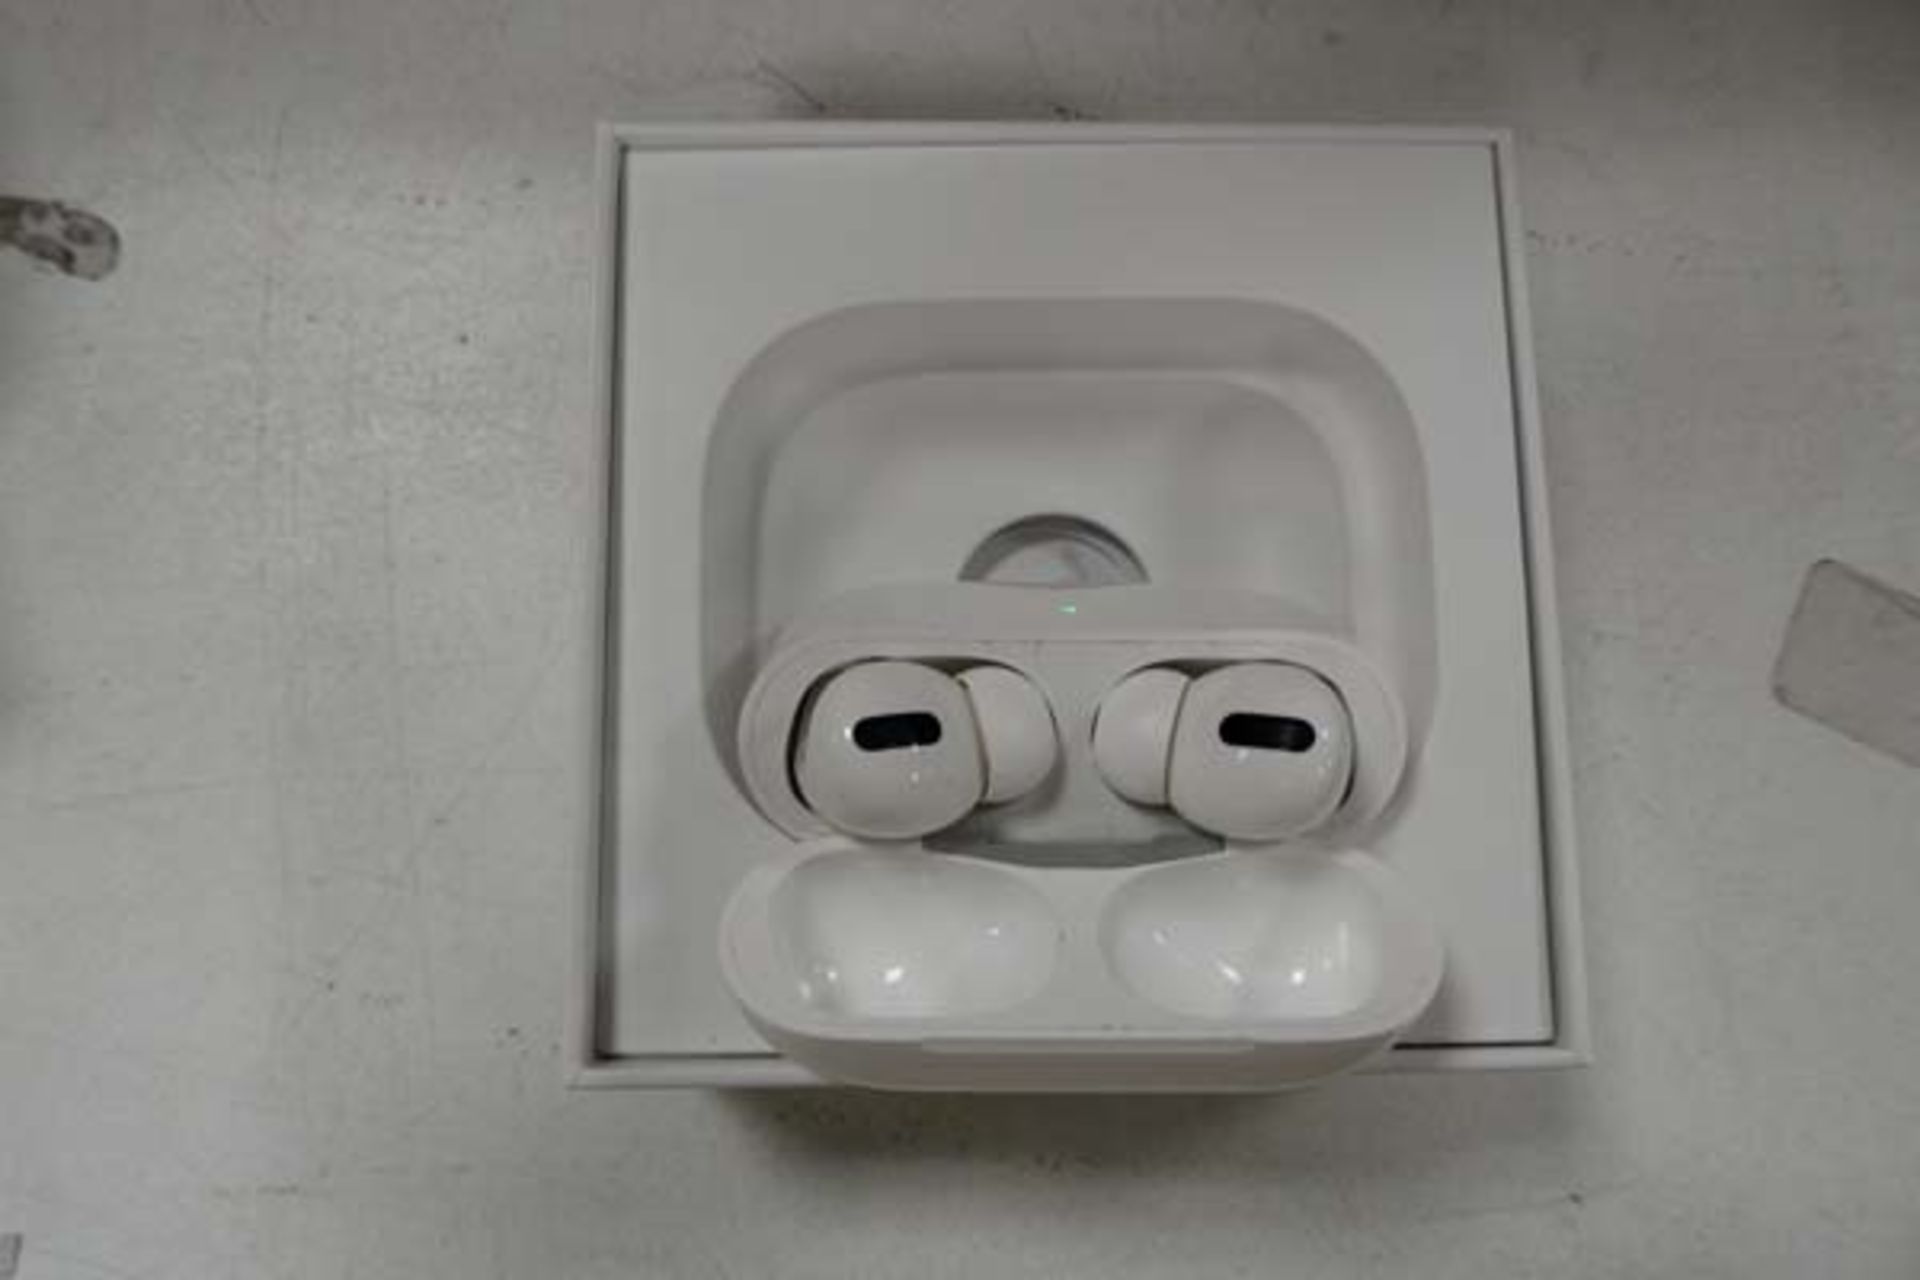 2022 Pair of Apple air pods pro with wireless charging case and box